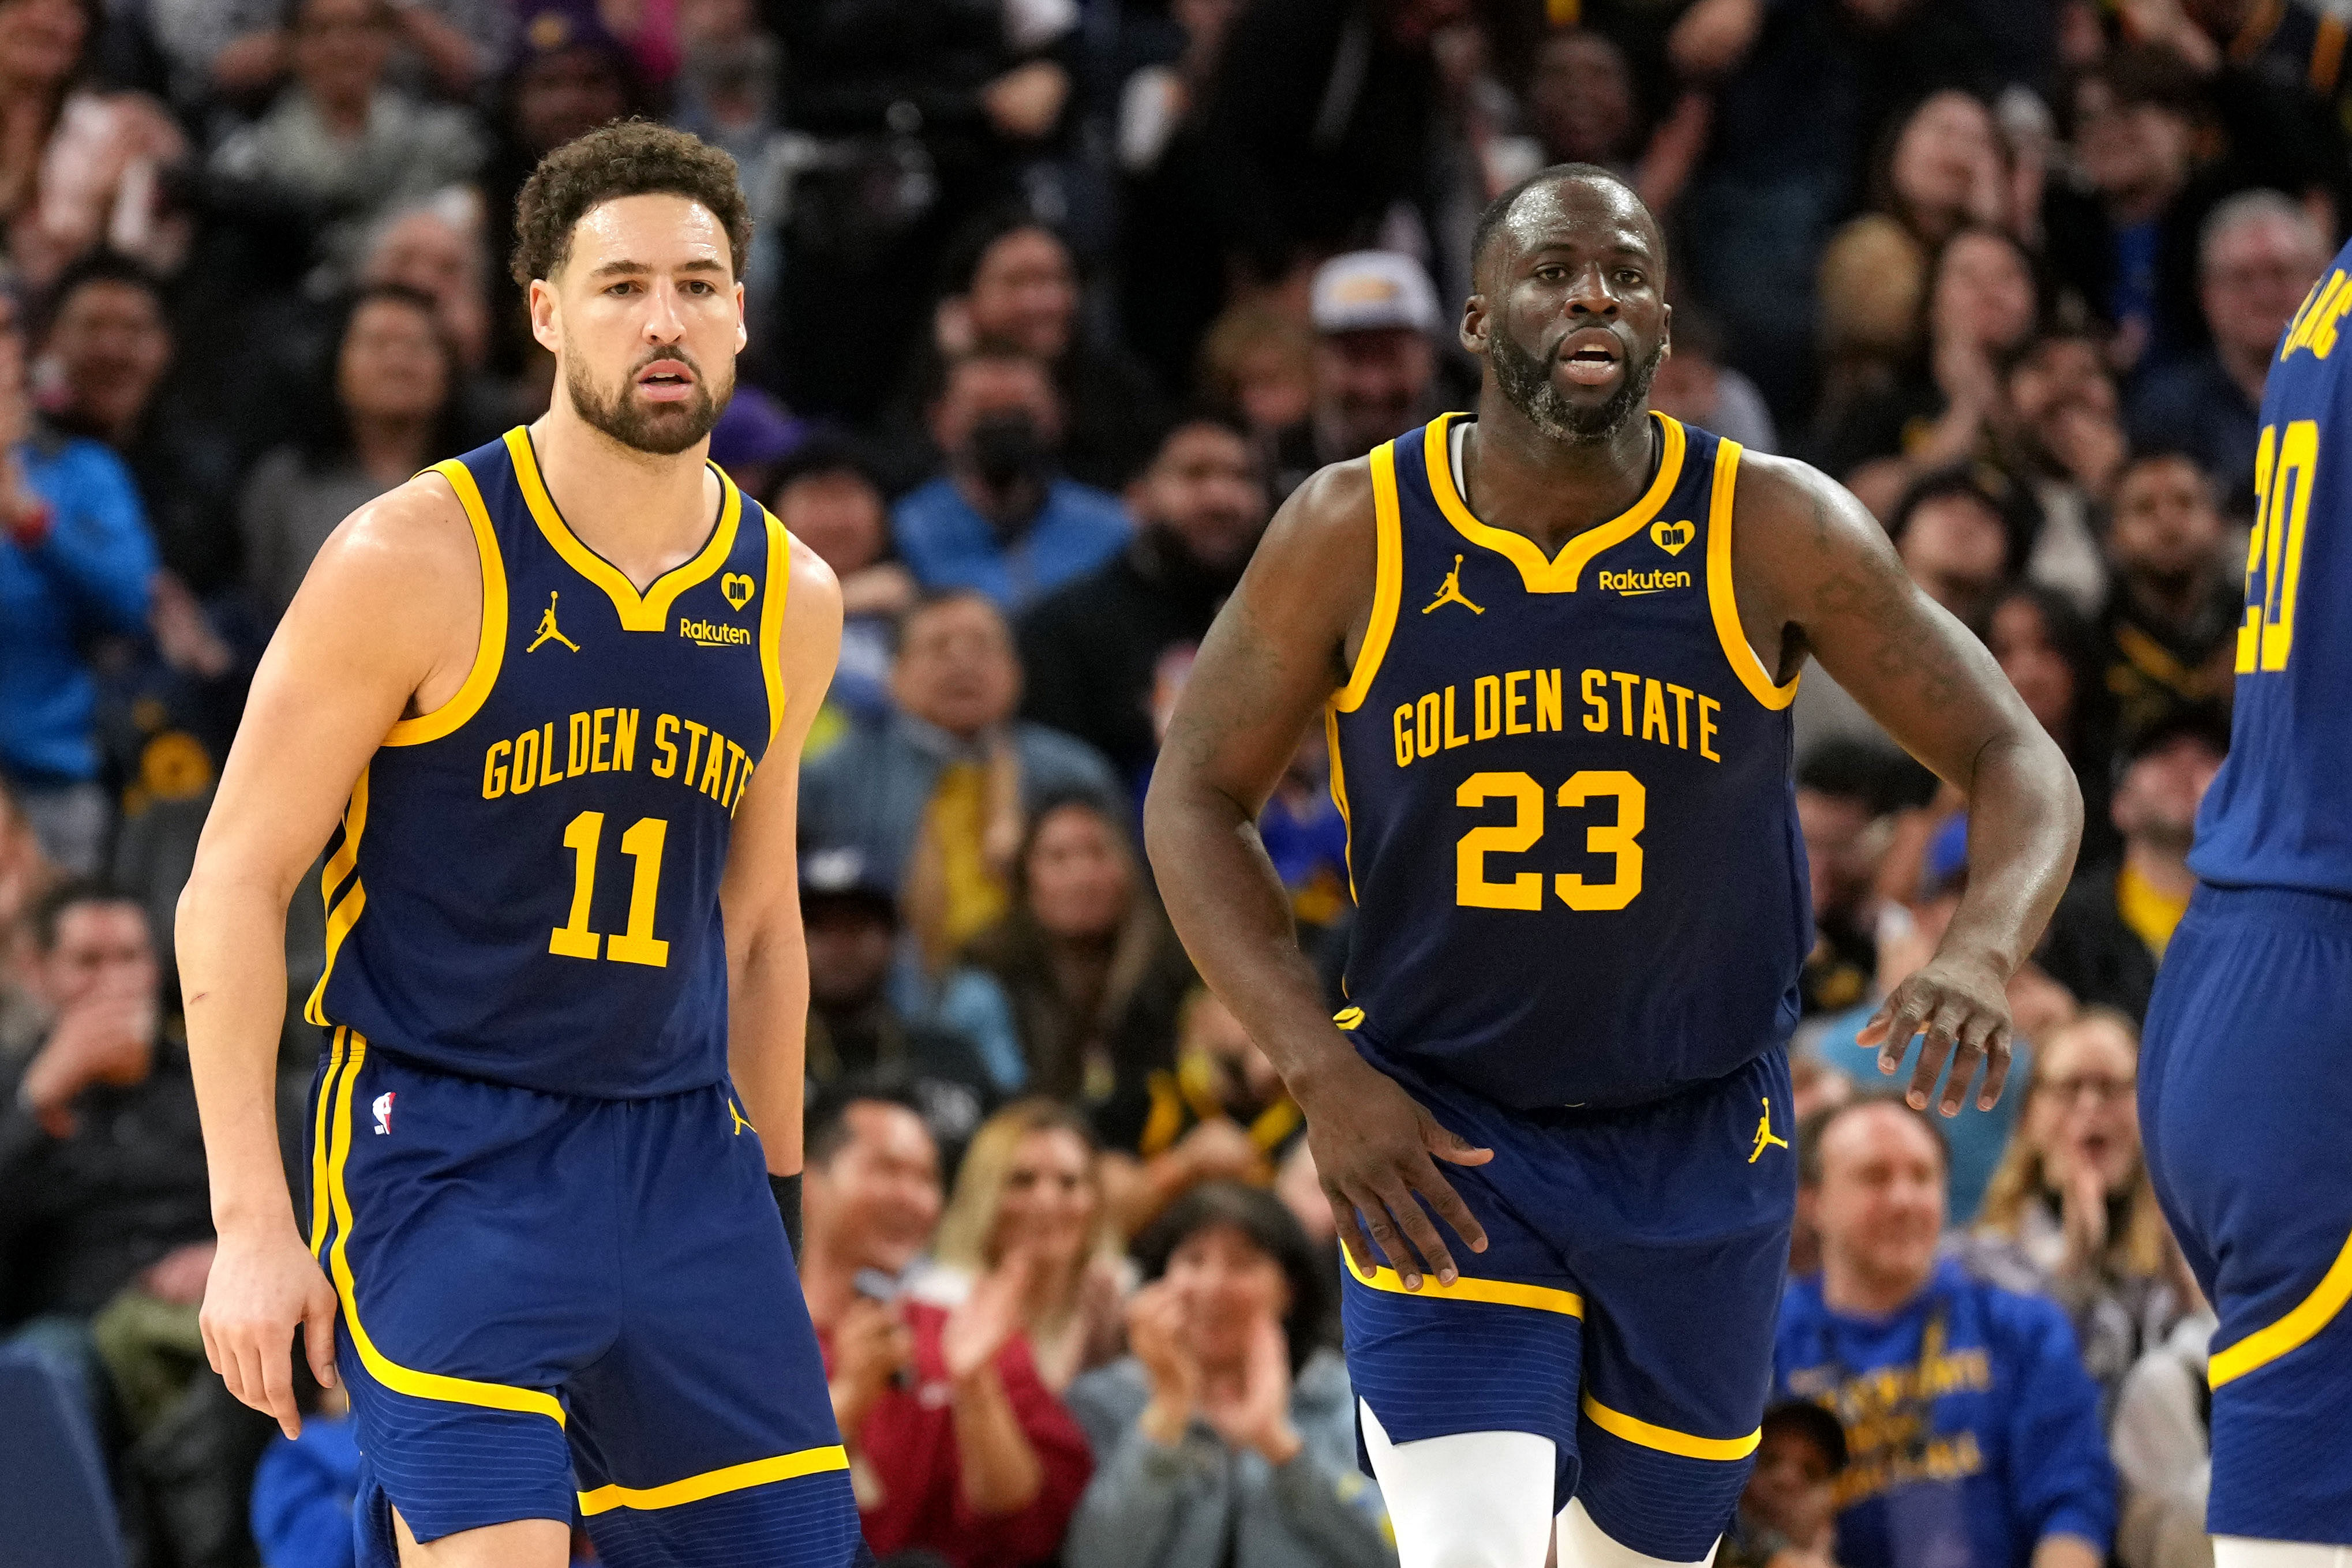 Golden State Warriors guard Klay Thompson and forward Draymond Green